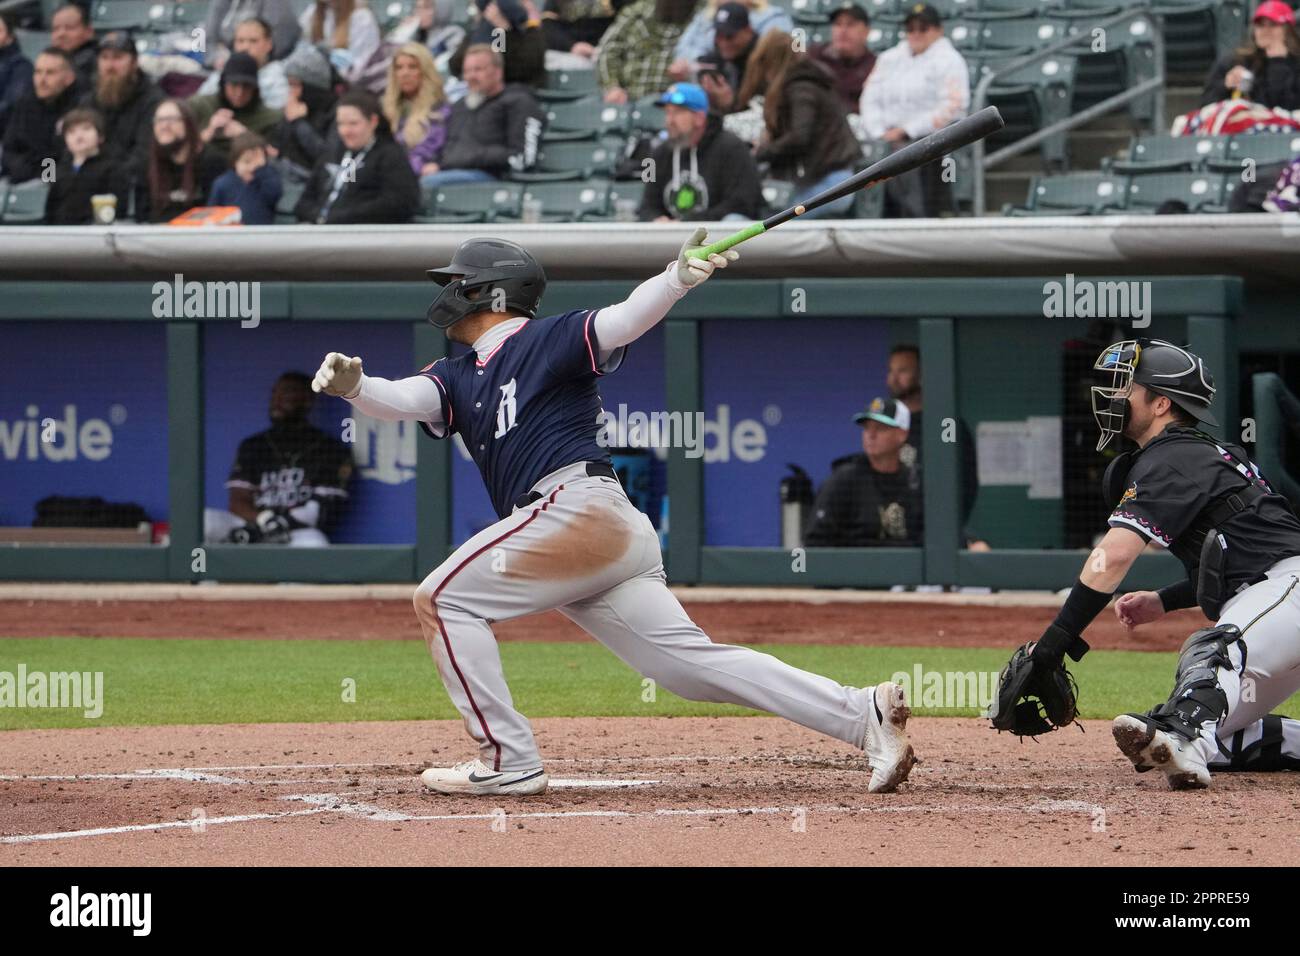 Salt Lake UT, USA. 22nd Apr, 2023. Reno left fielder Dominic Canzone (8) gets a hit during the game with Reno Aces and Salt Lake Bees held at Smiths Fiield in Salt Lake Ut. David Seelig/Cal Sport Medi. Credit: csm/Alamy Live News Stock Photo